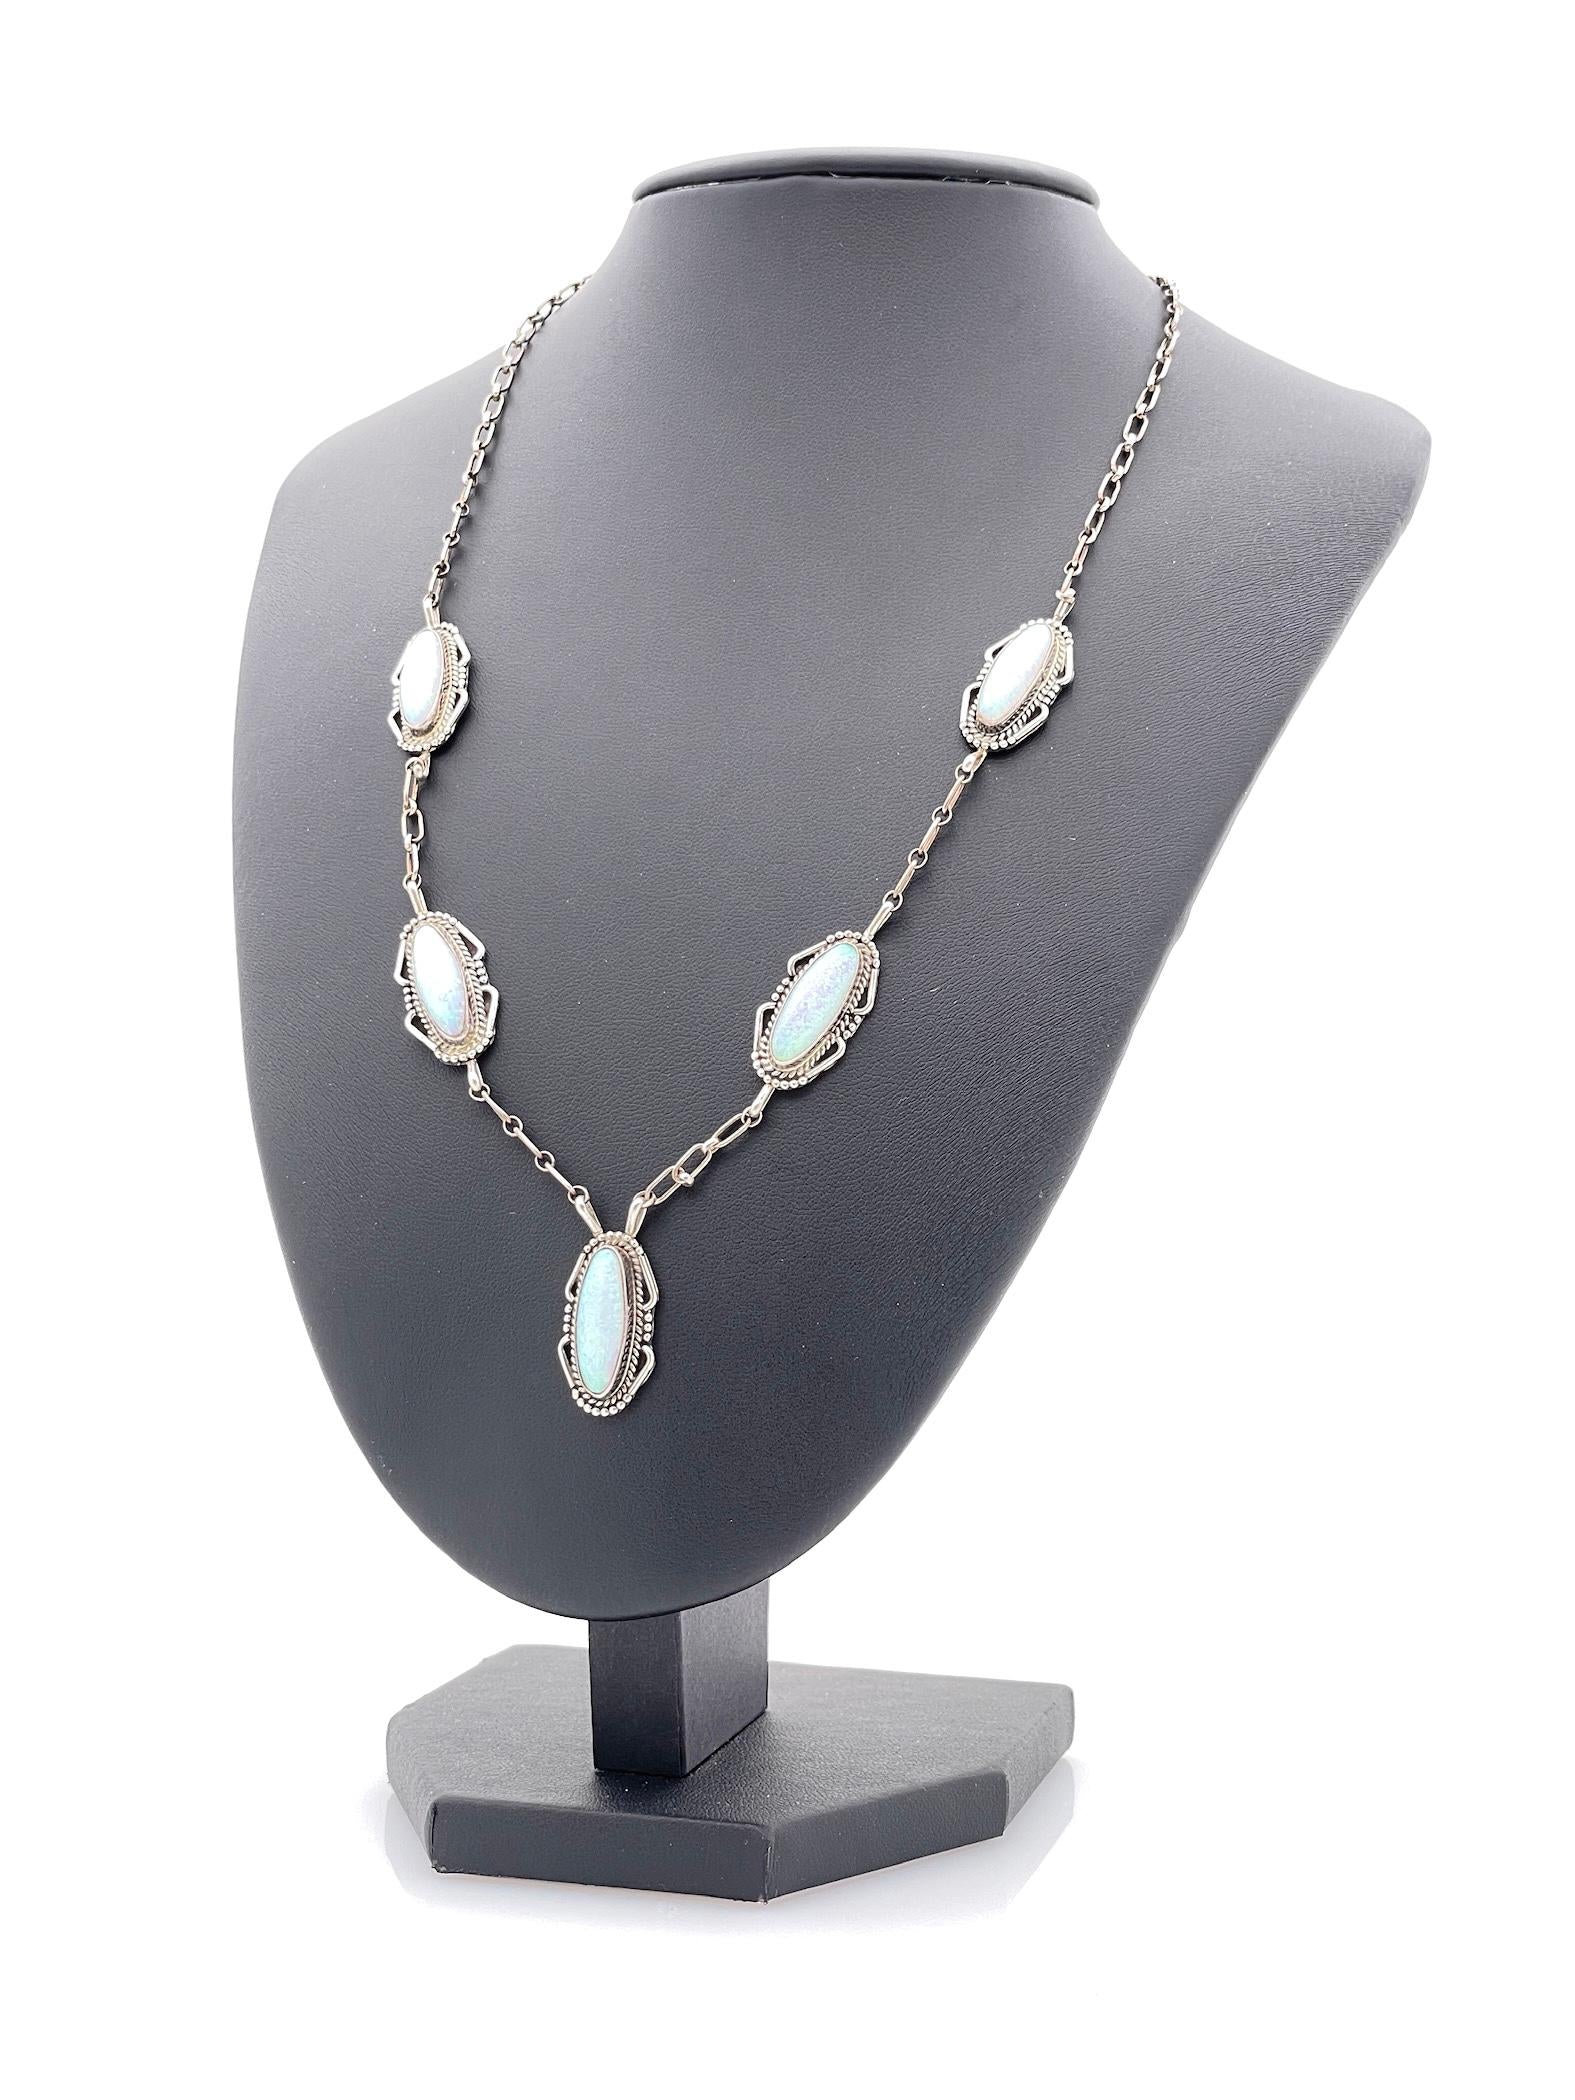 JAN MARIANO NAVAJO STERLING SILVER OPAL NECKLACE